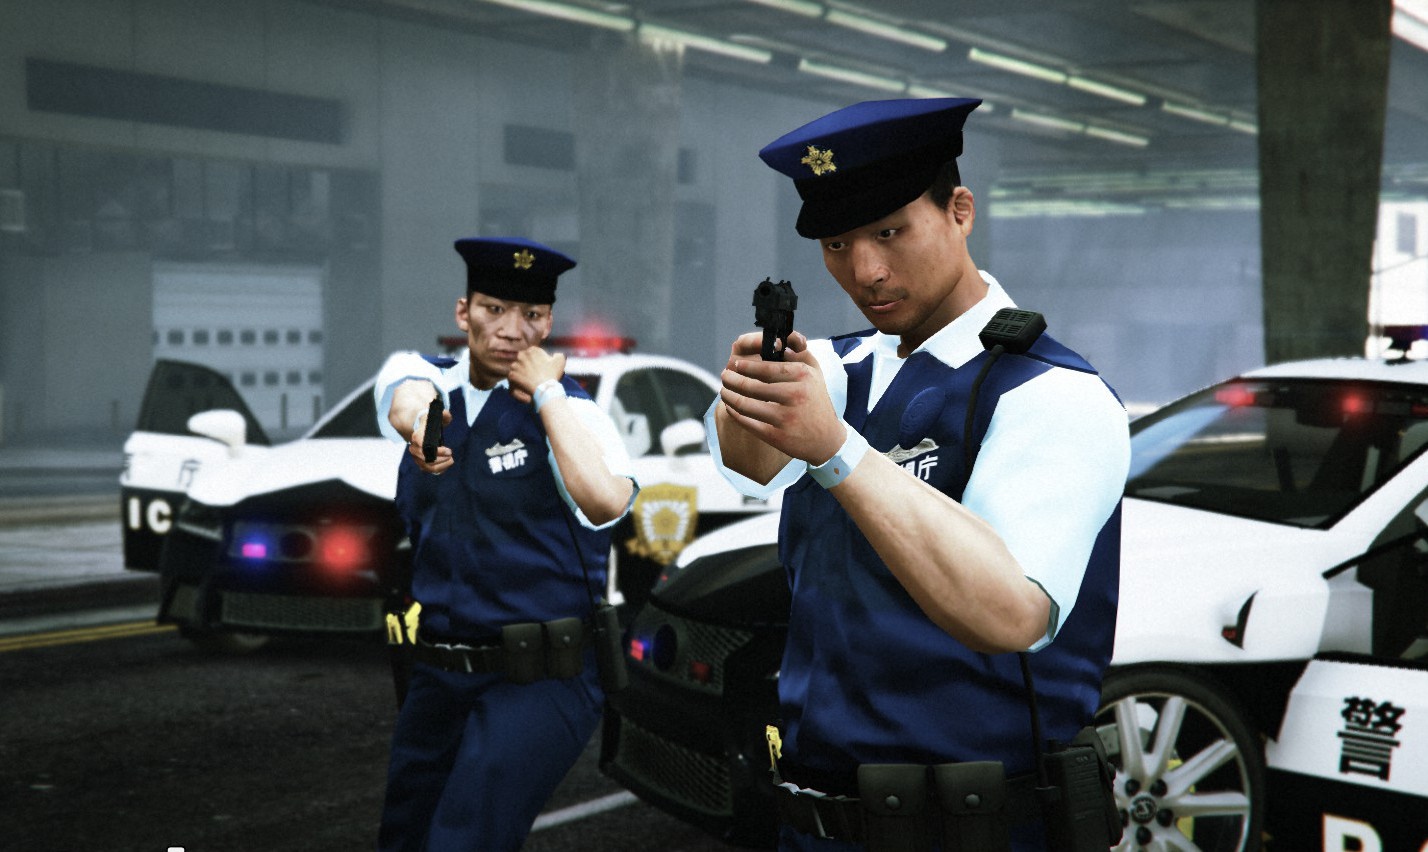 What do you need to become a police officer? - 